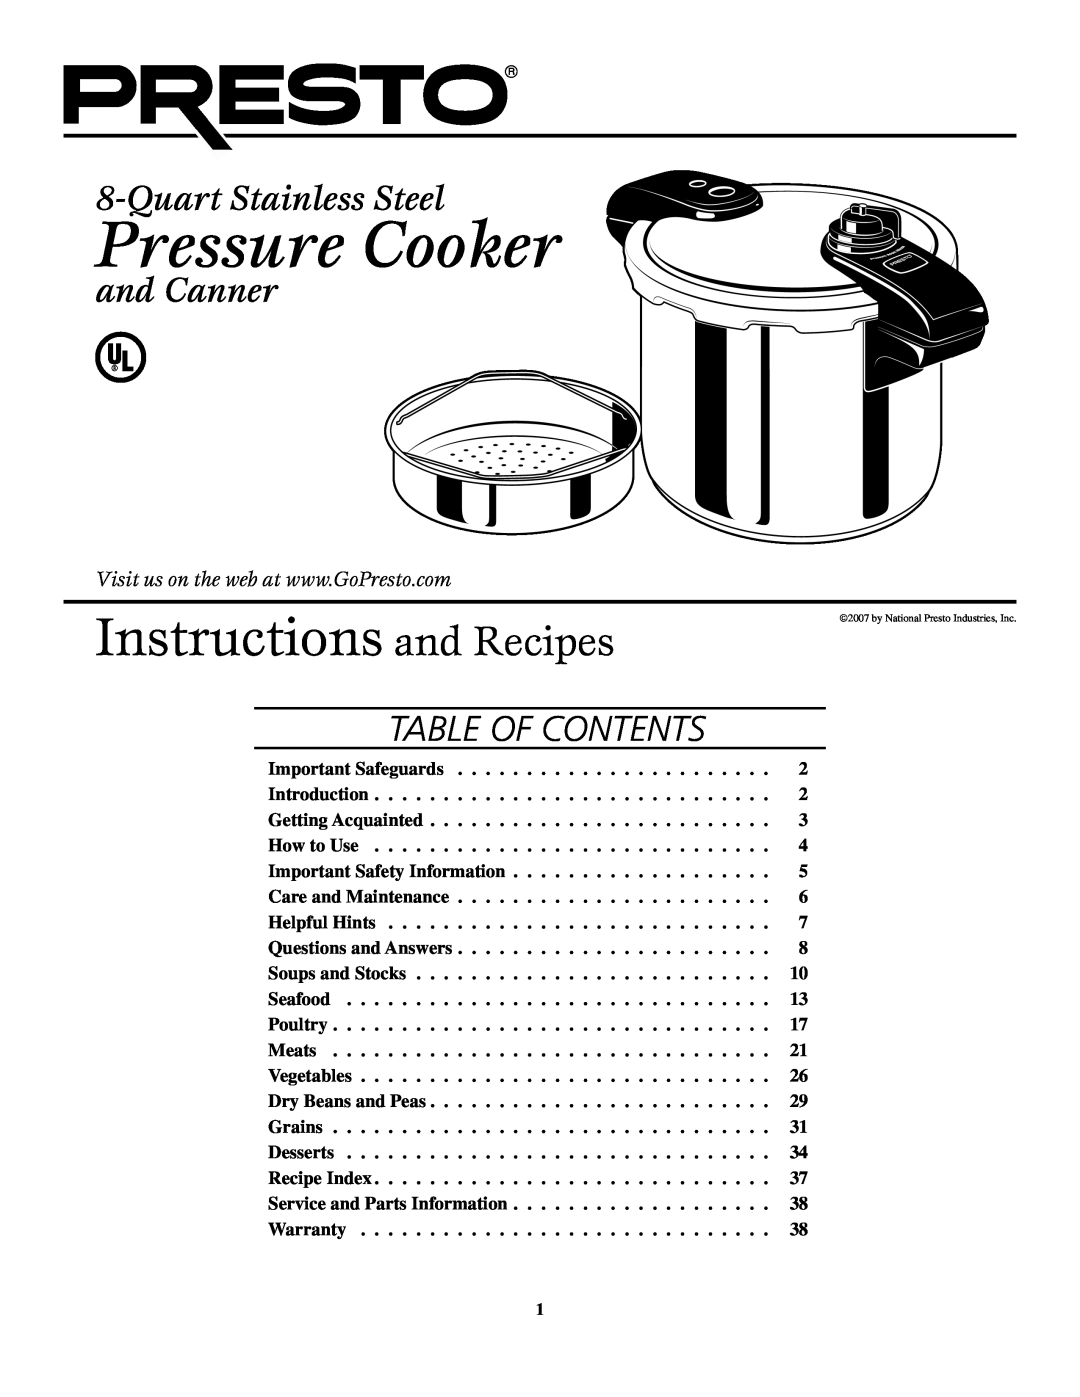 Presto 8-Quart Stainless Steel Pressure Cooker and Canner warranty Table of Contents, instructions and Recipes 